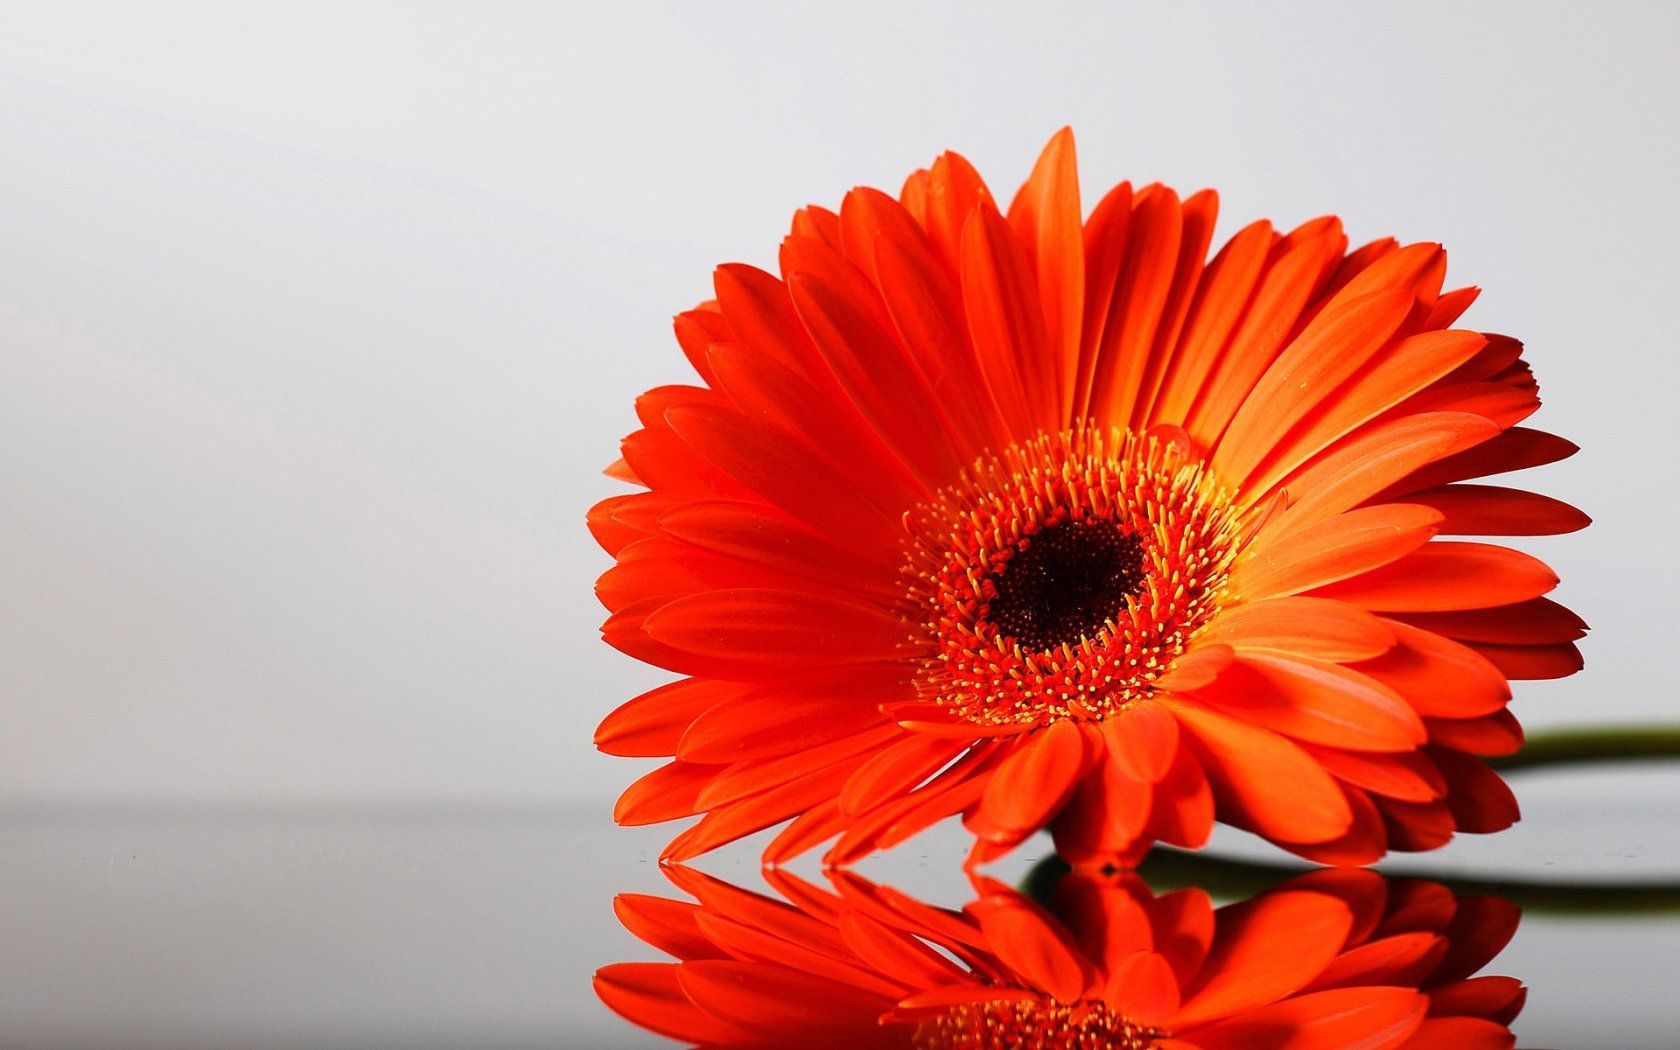 ... Orange Flowers Wallpapers. These desktop wallpapers are high definition and available in wide range of sizes and resolutions.